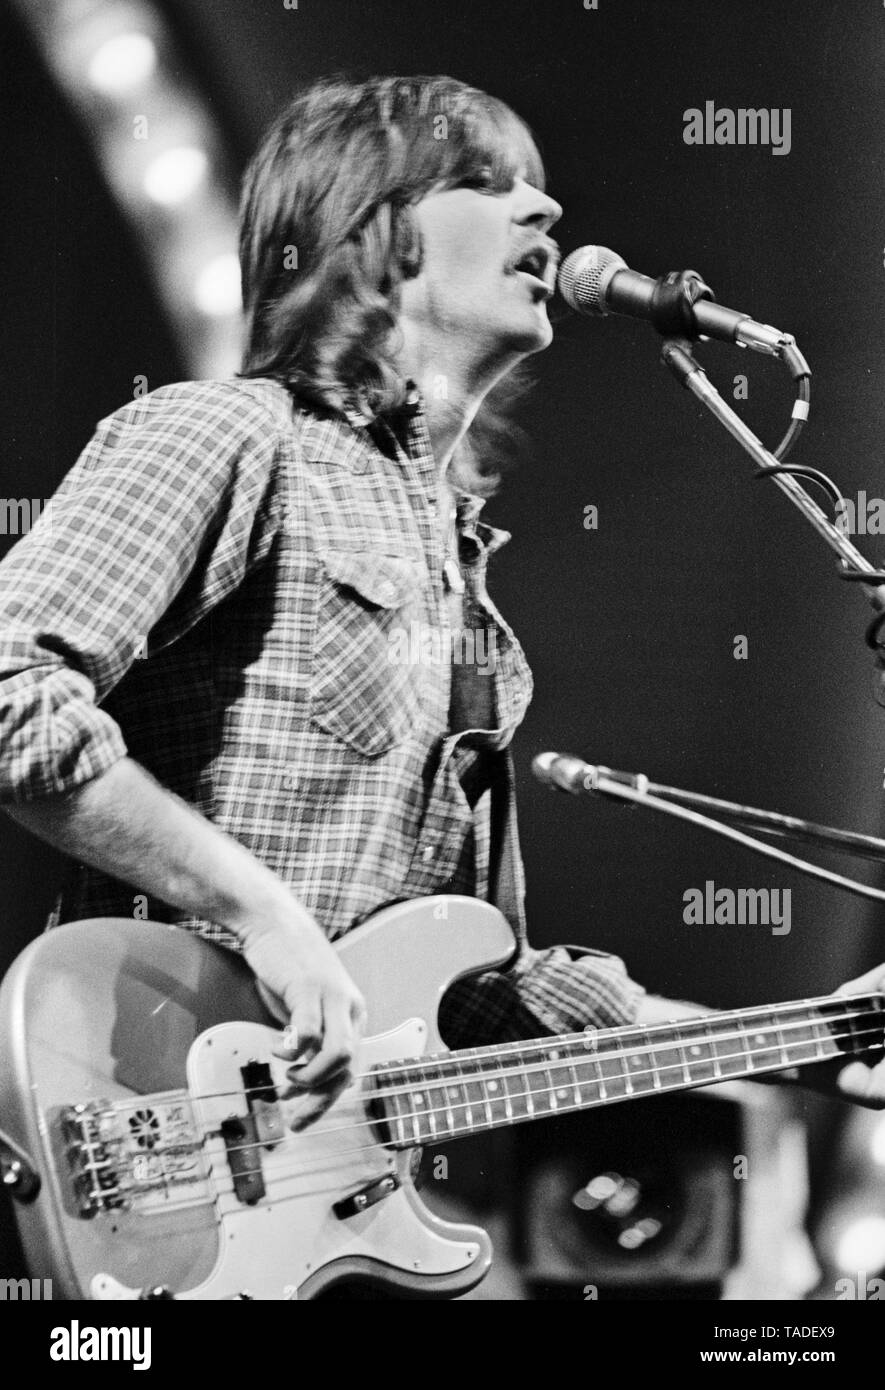 Amsterdam, Netherlands - March 10, 1973. Randy Meisner of American group Eagles perform live on stage at Concertgebouw in Amsterdam, Netherlands in 1972.  (Photo Gijsbert Hanekroot) Stock Photo